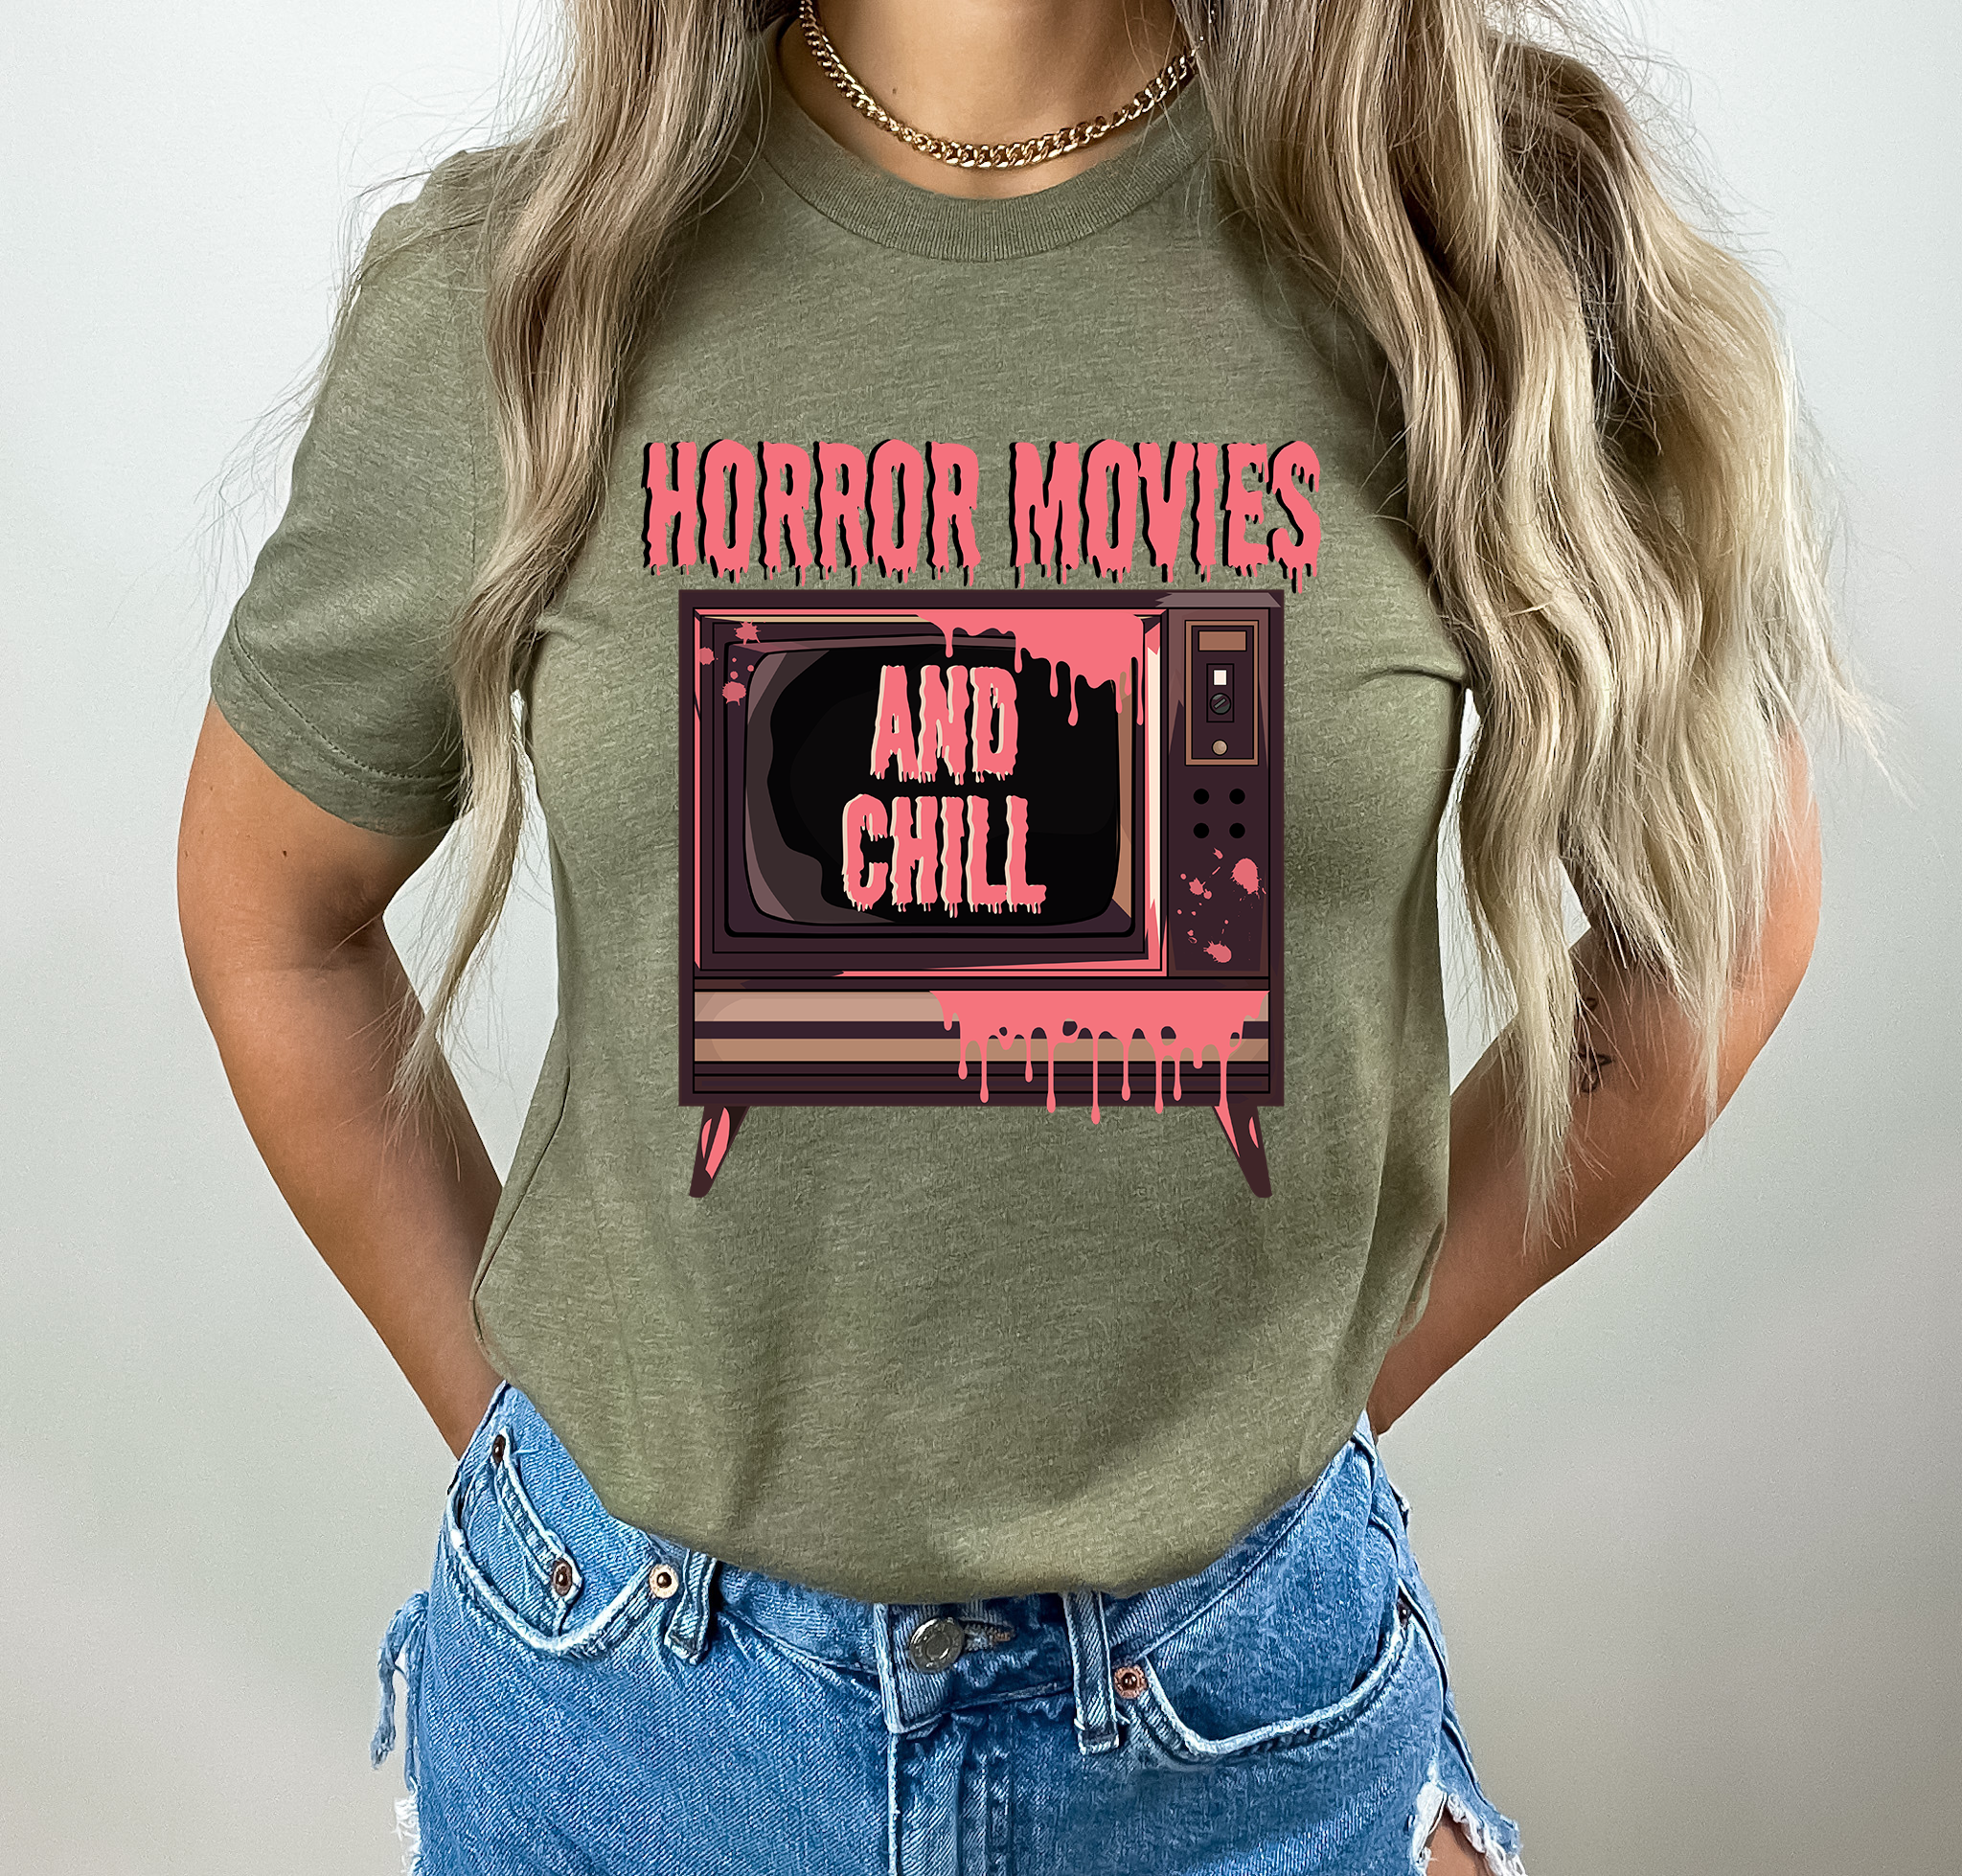 Horror Movies And Chill TV